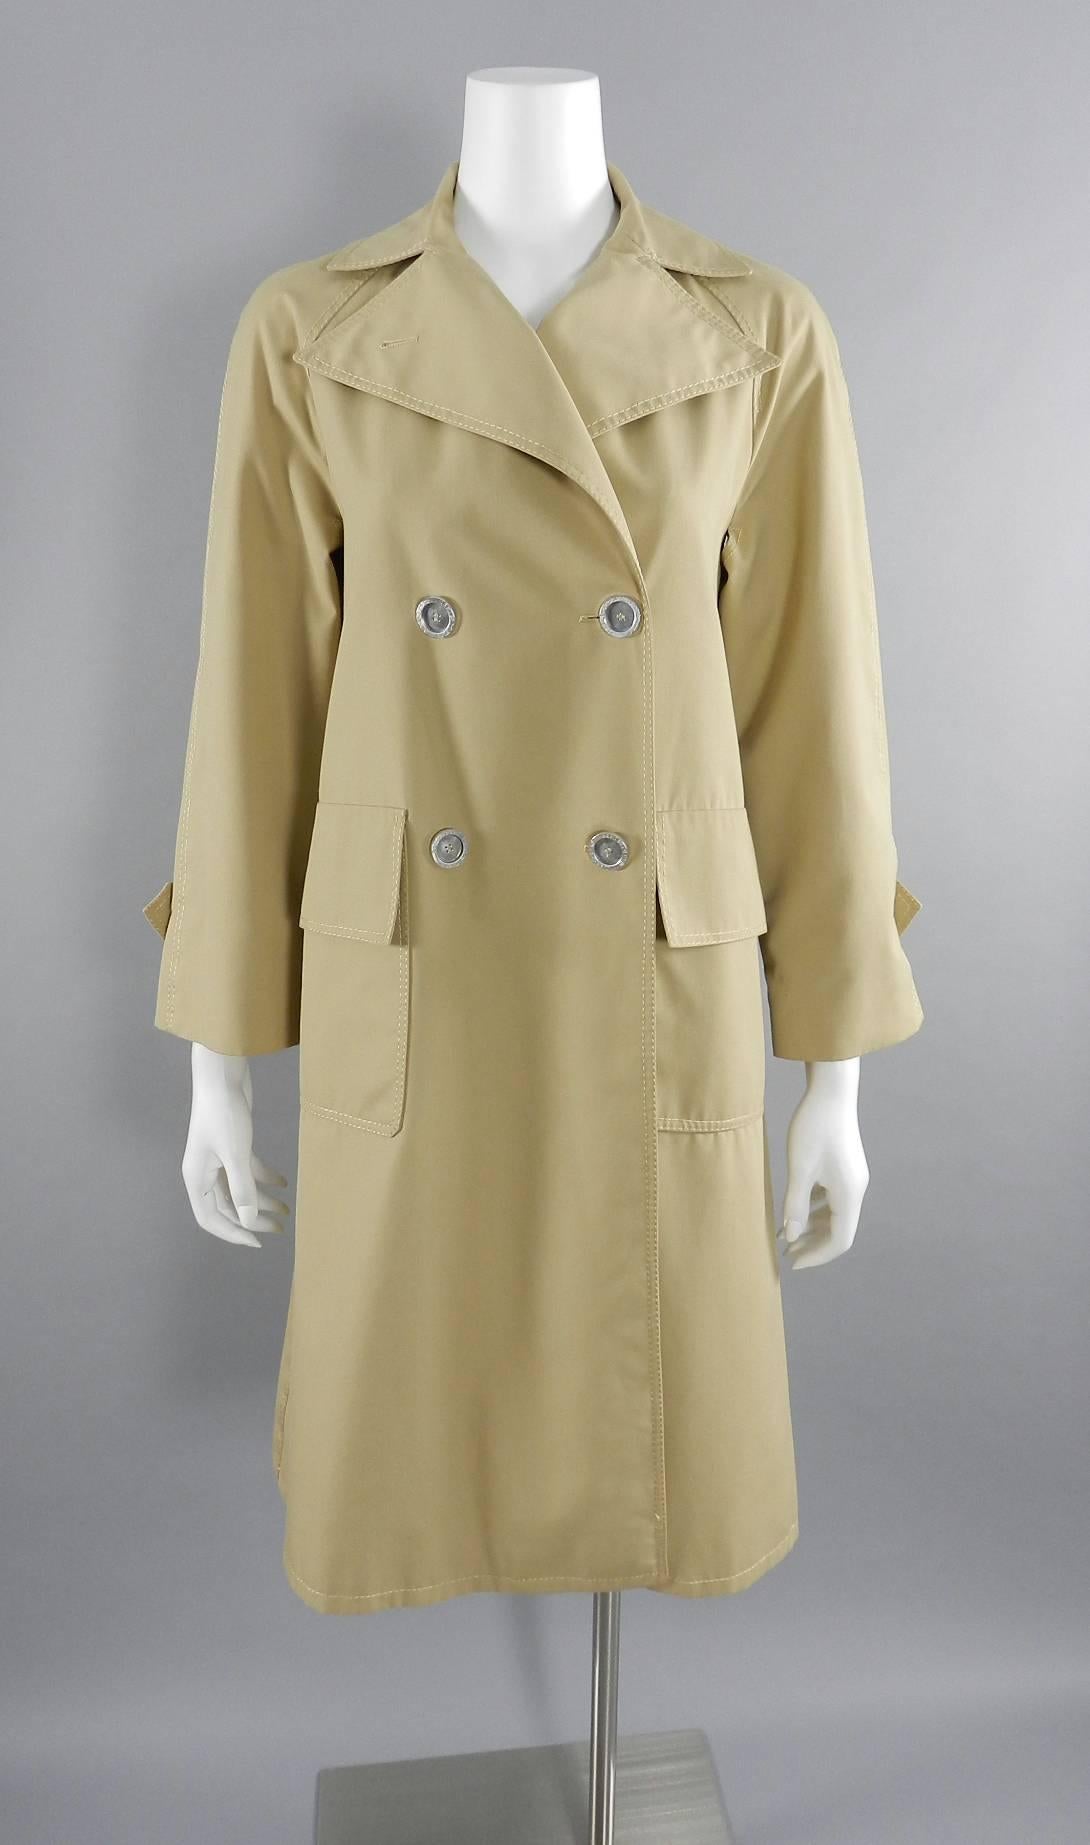 Vintage 1970's Hermes Sport trench coat. Label reads Hermes Sport for Bonwit Teller. Beige cotton spring light trench coat with sash belt and aluminum metal logo buttons. Size USA small - 4. Garment bust measures 36